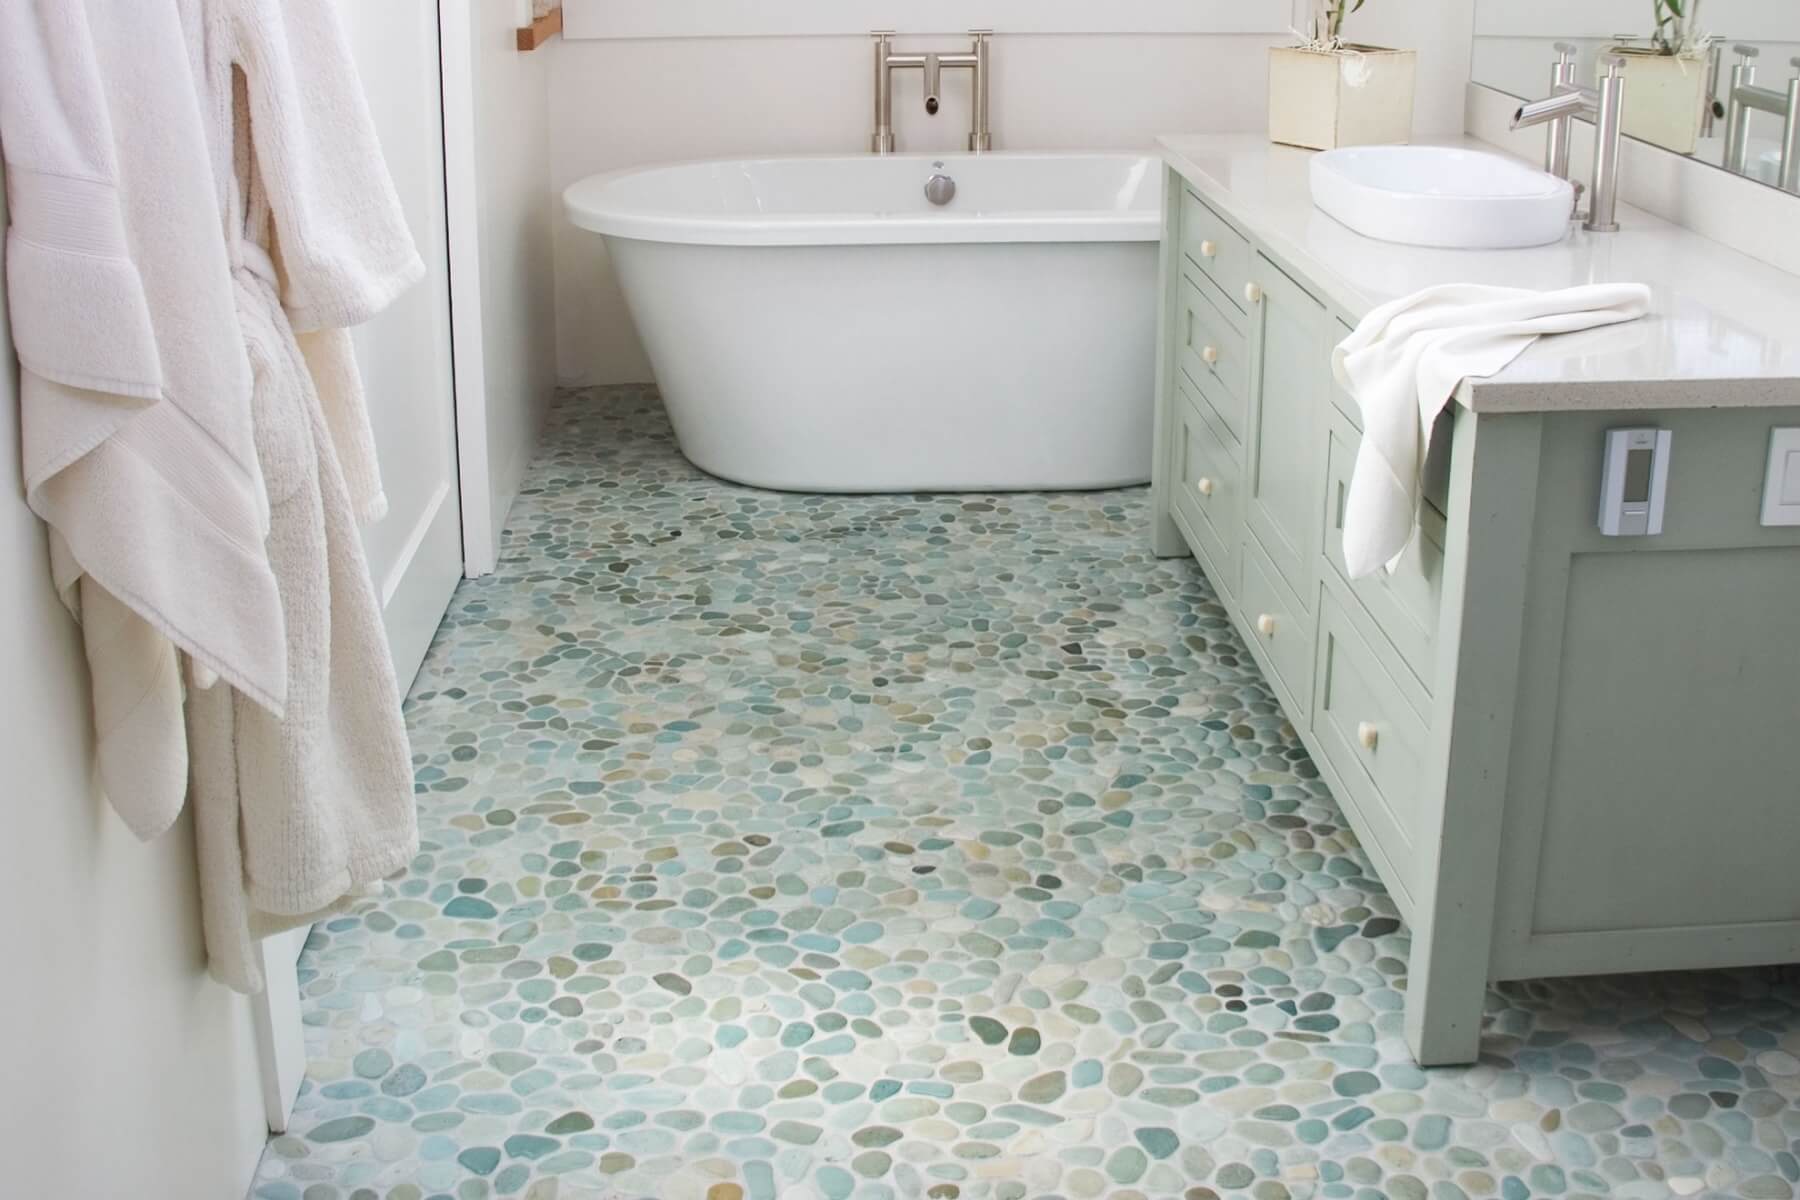 Bring nature into the bathroom with natural stone tiles